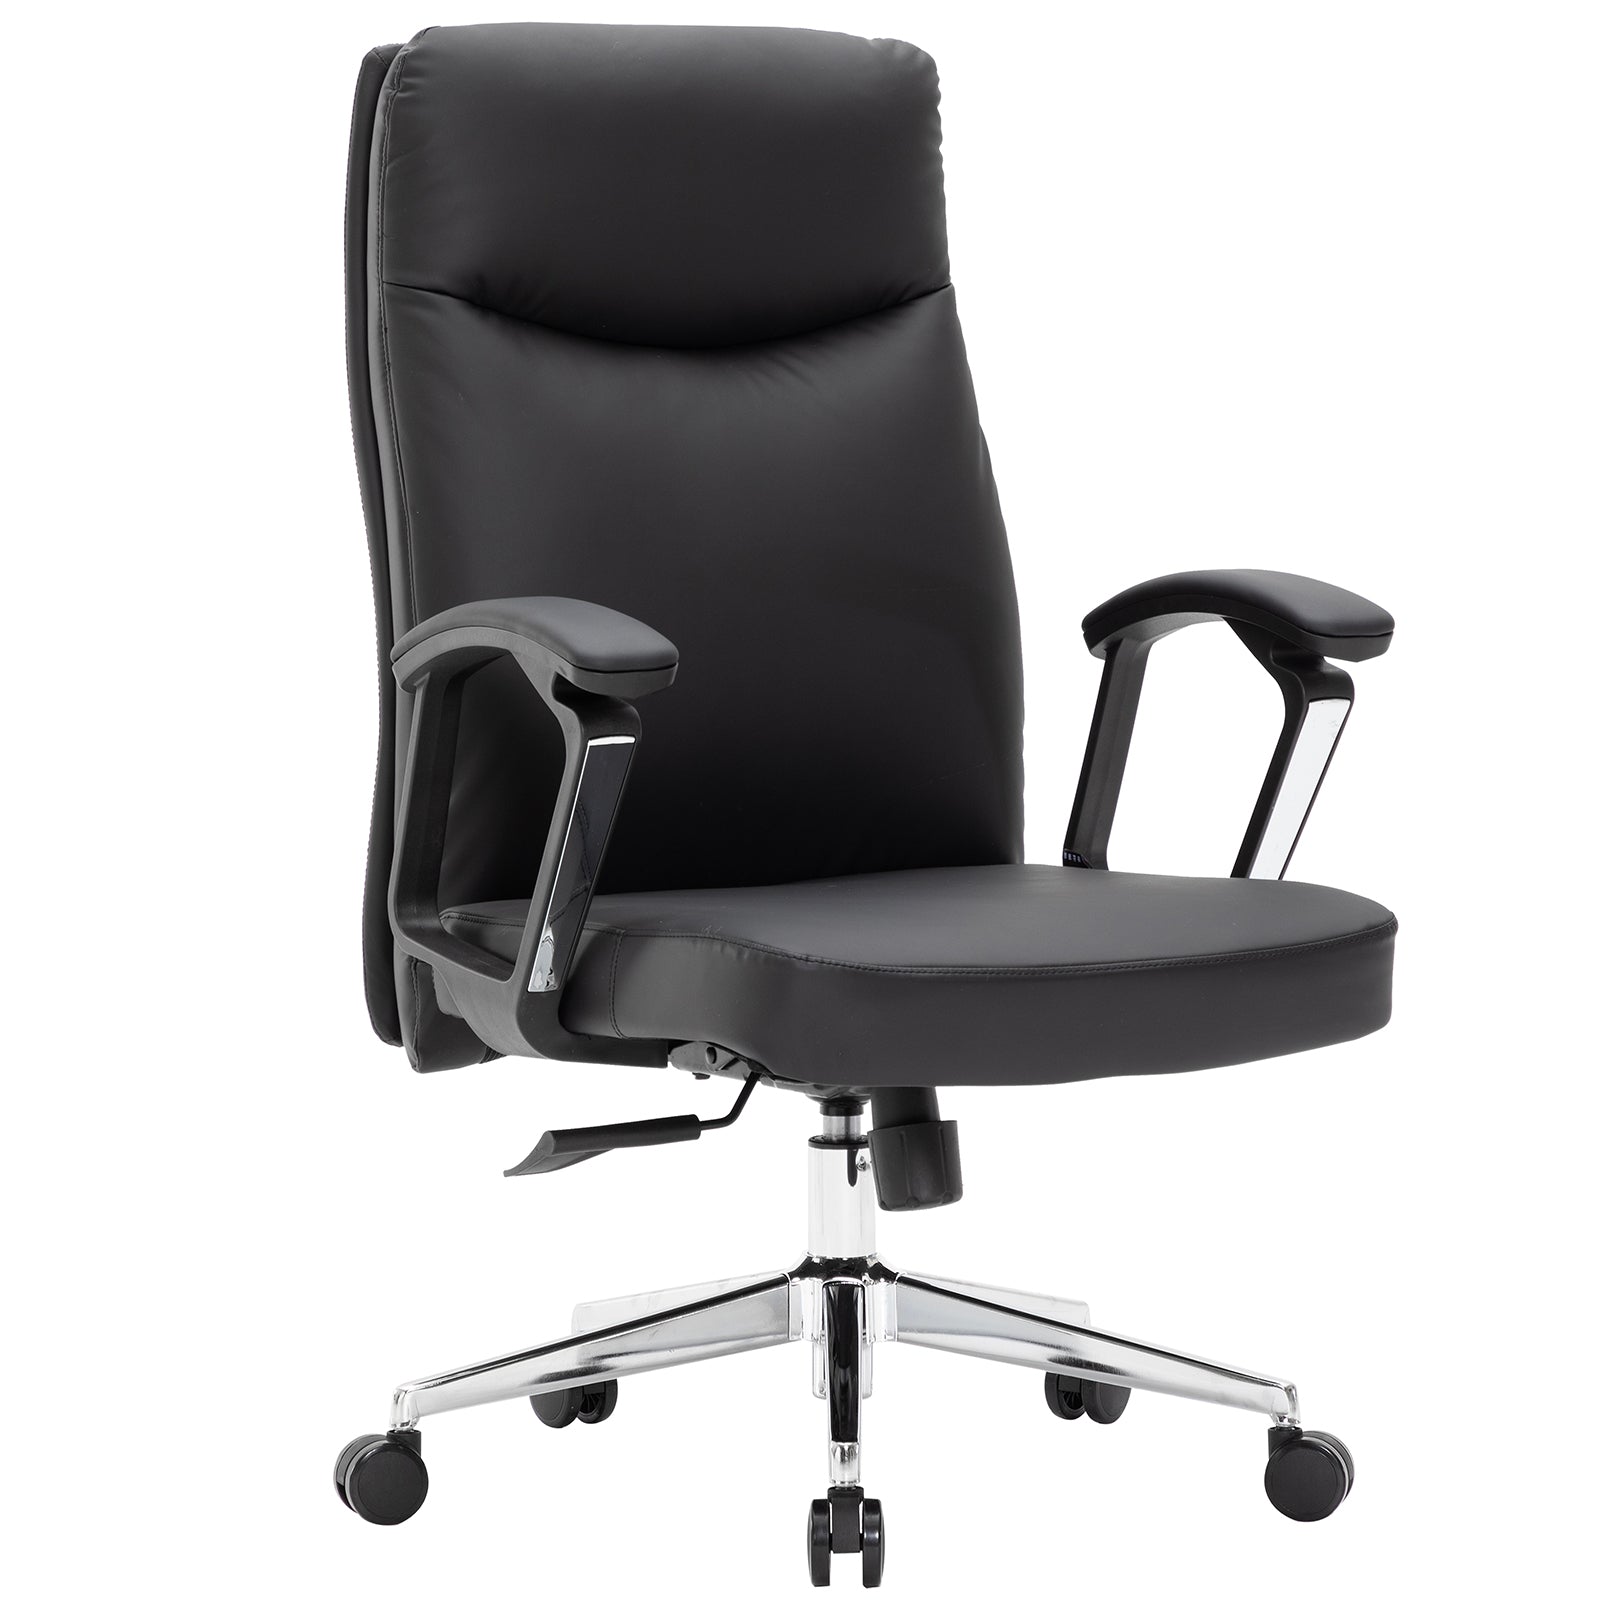 VOFFOV Leather Office Chair with Swivel, Height Adjust and Tilt Function